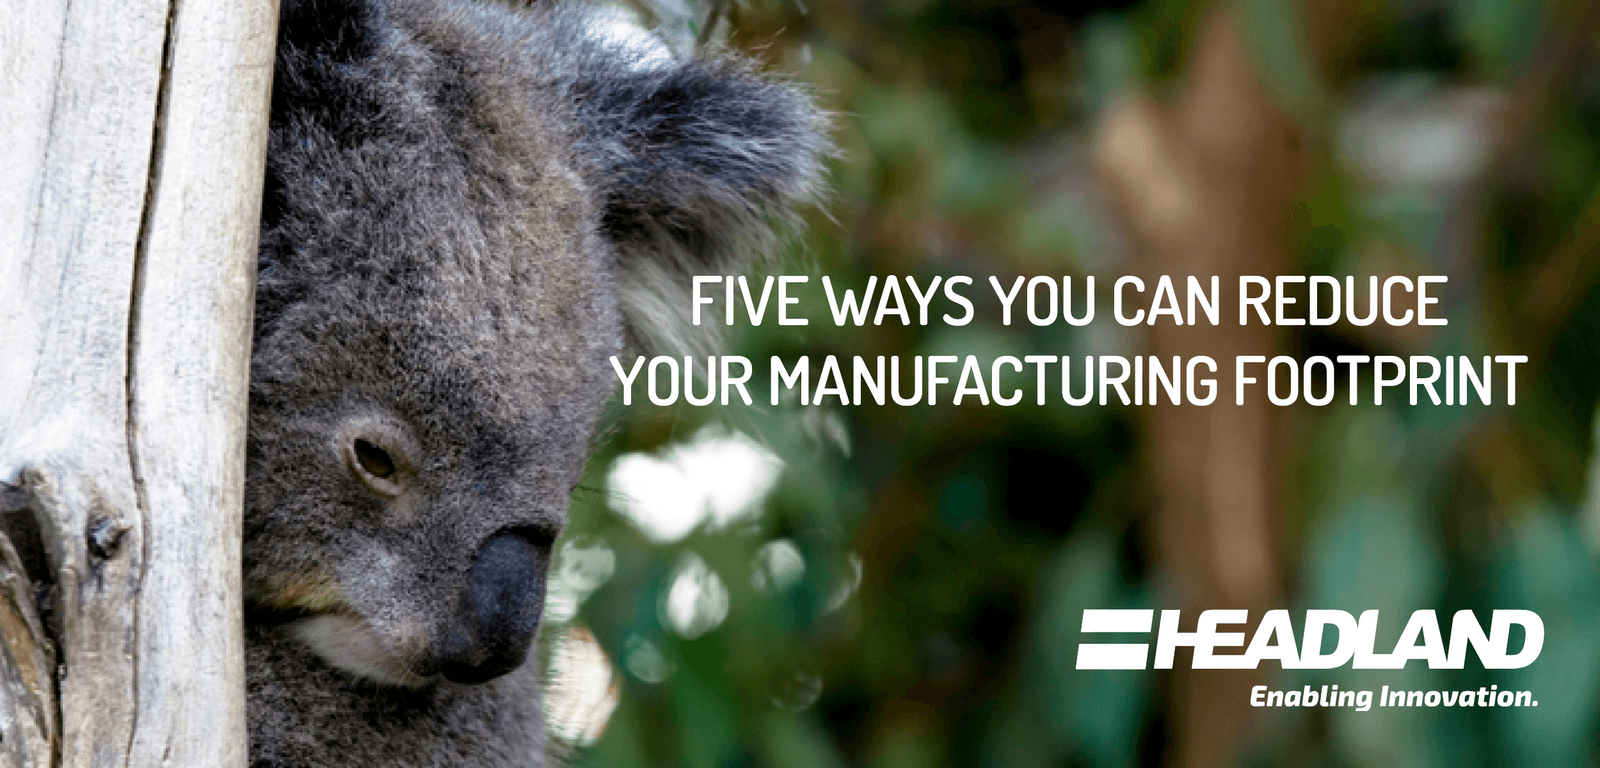 Five Ways You Can Reduce Your Manufacturing Footprint